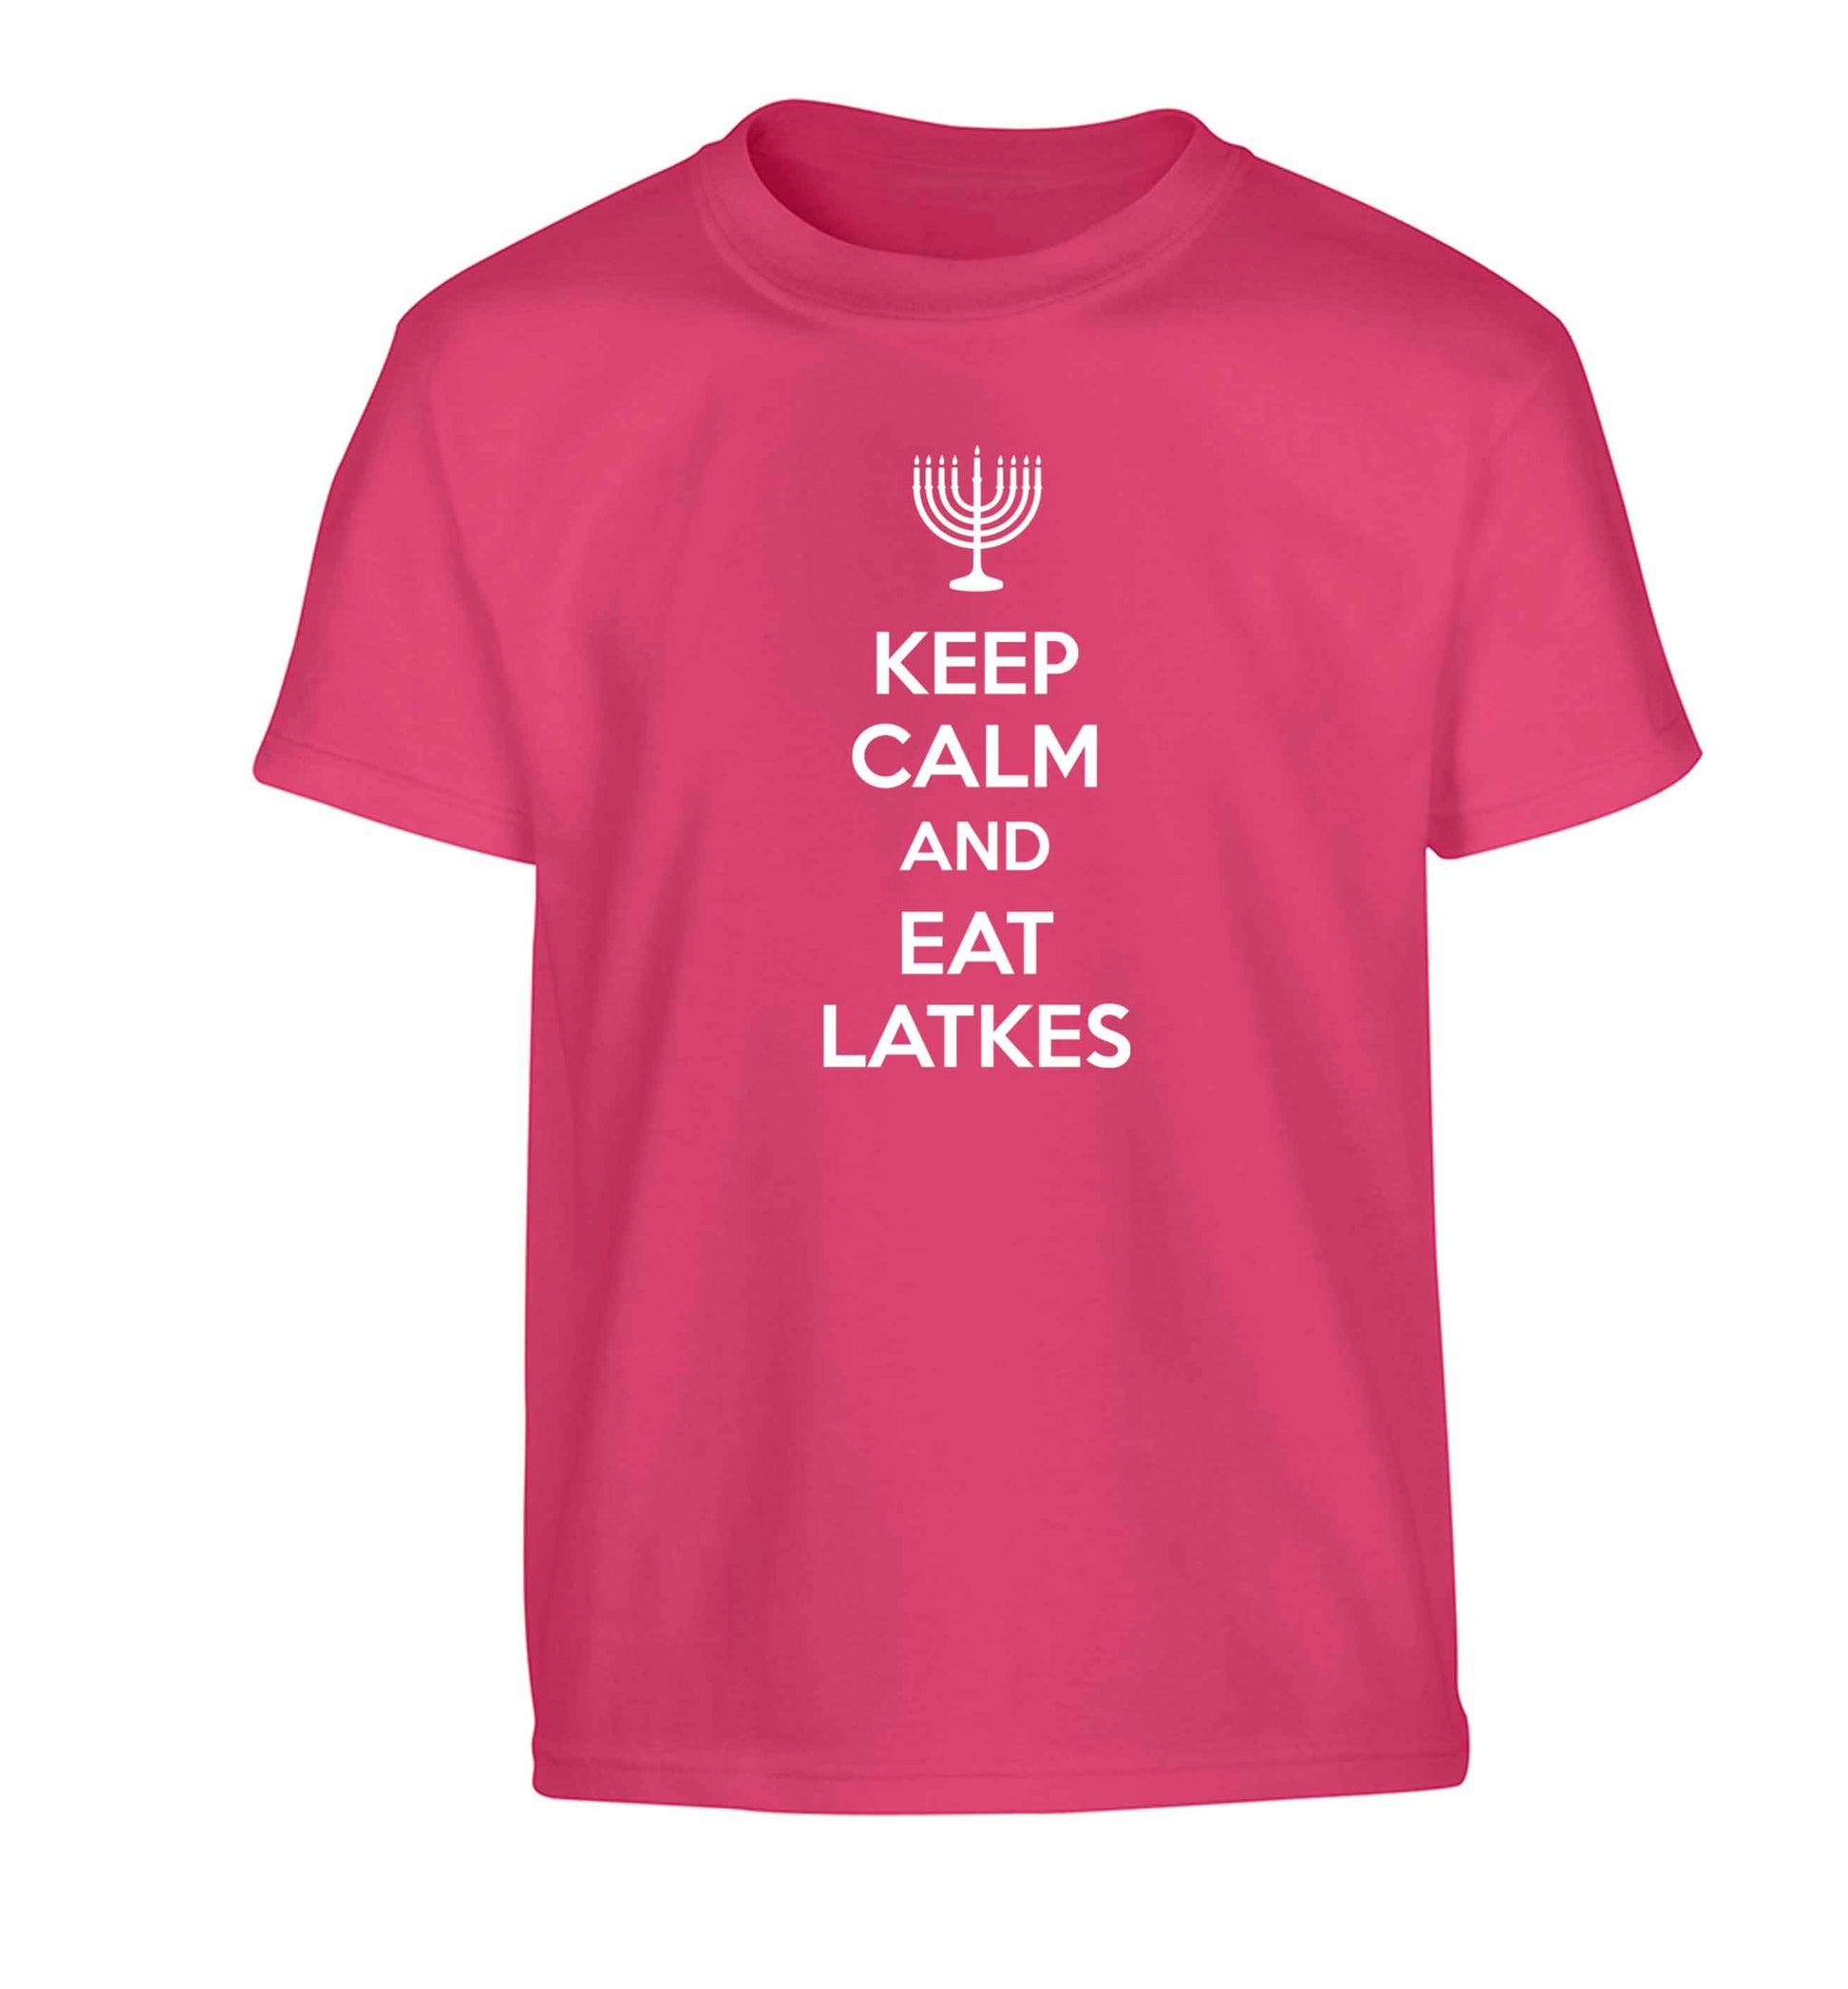 Keep calm and eat latkes Children's pink Tshirt 12-13 Years